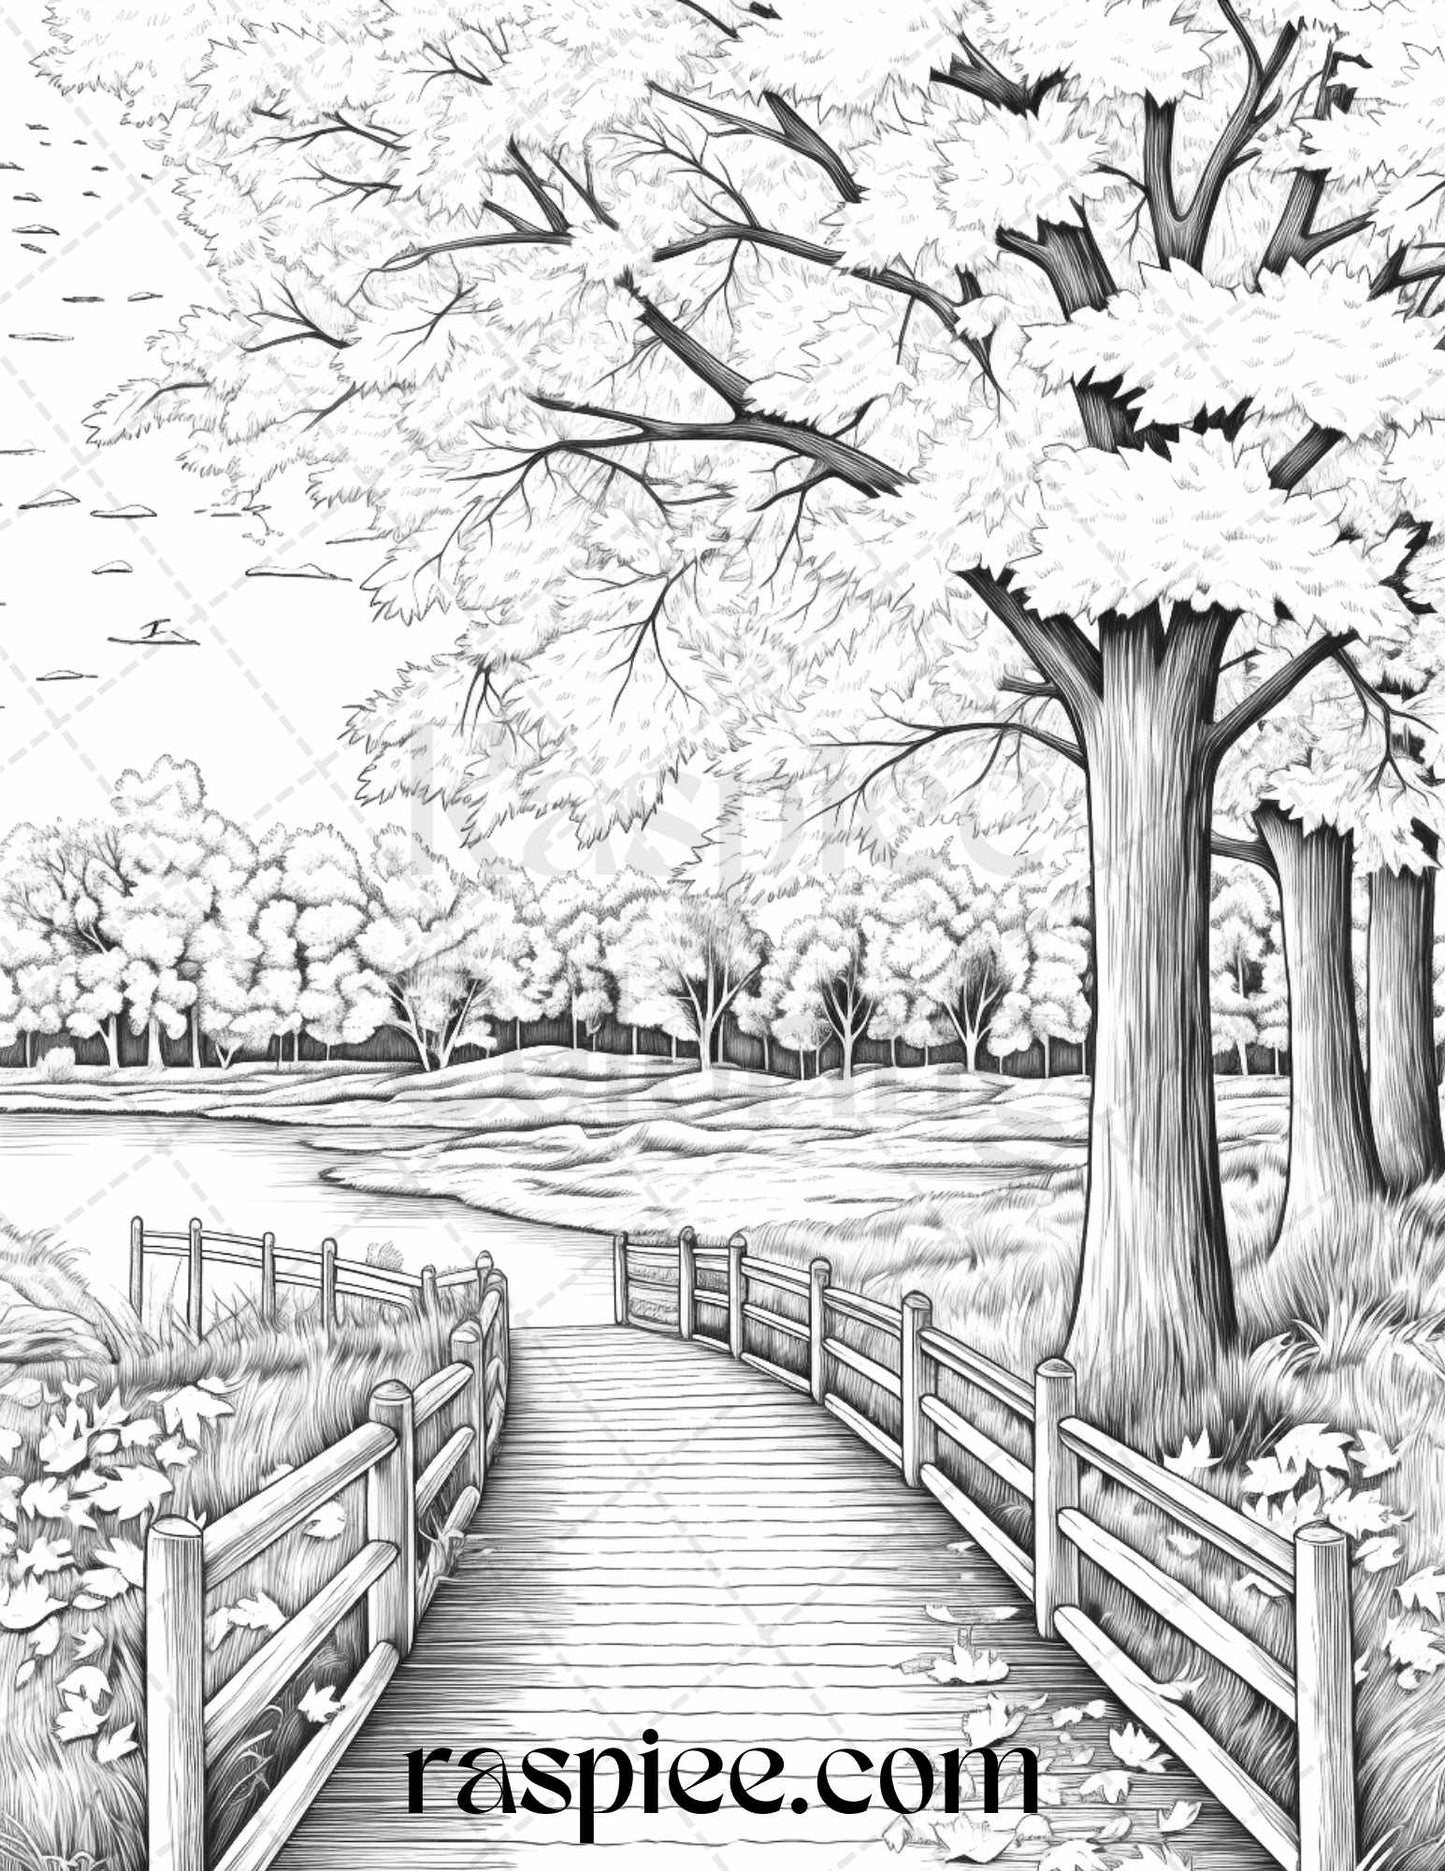 Autumn Scenery Grayscale Coloring Pages Printable for Adults, PDF File Instant Download - Raspiee Coloring